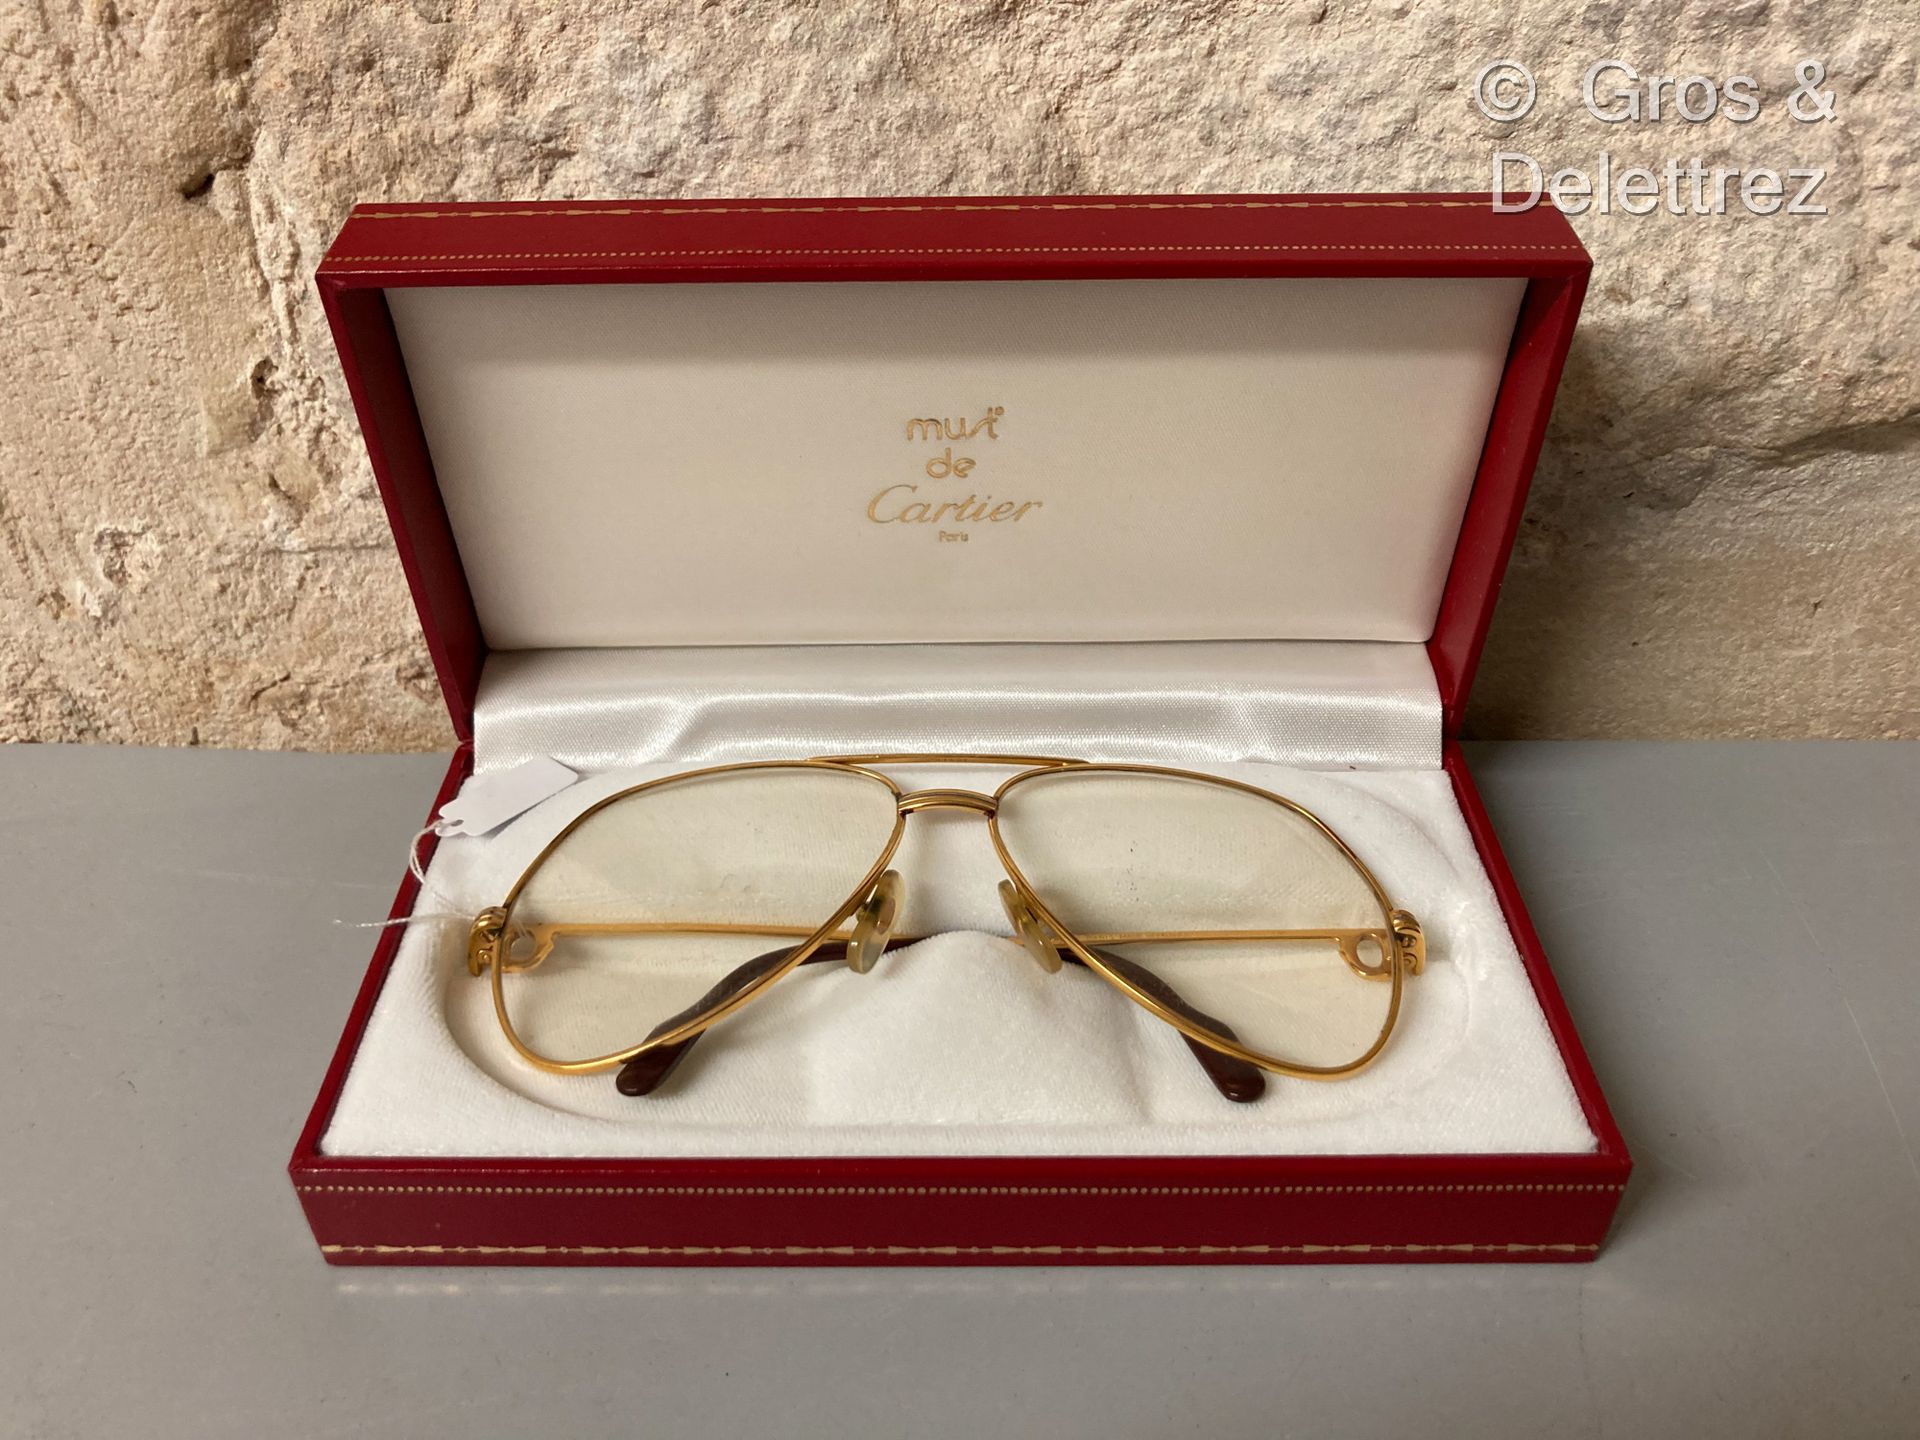 Null (E) CARTIER

MUST" gilded steel glasses

Case and certificate of guarantee